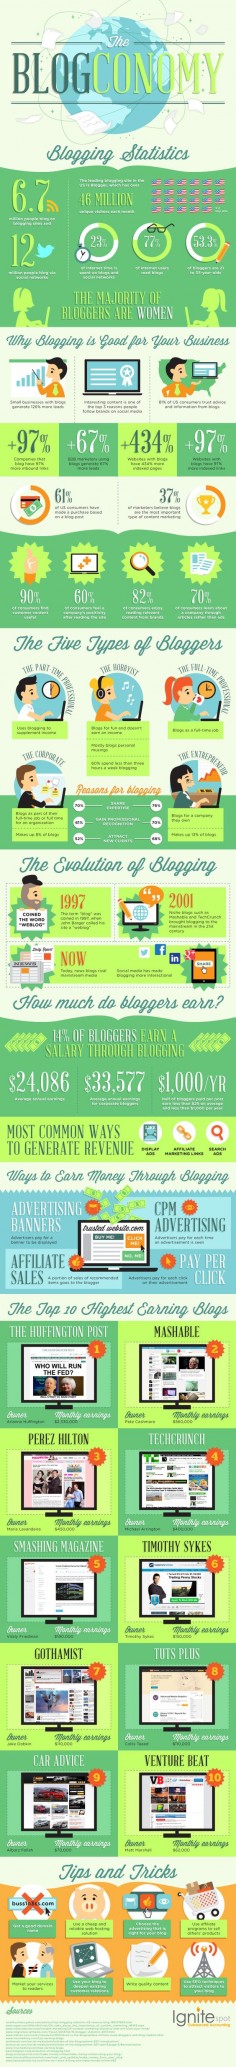 Why Blogging Is The Best Marketing Tool You Will Find #infographic